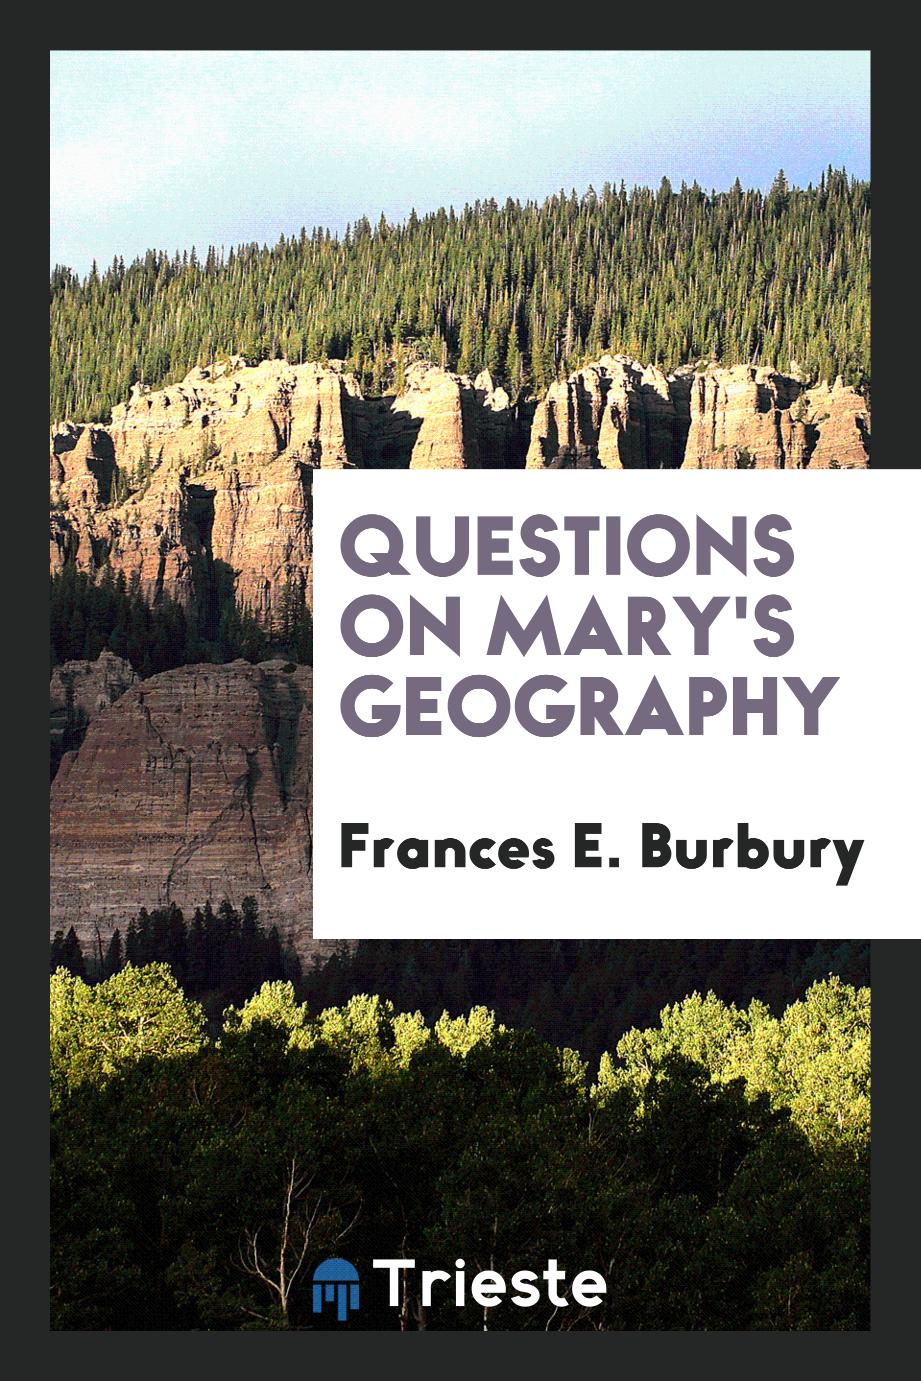 Questions on Mary's geography